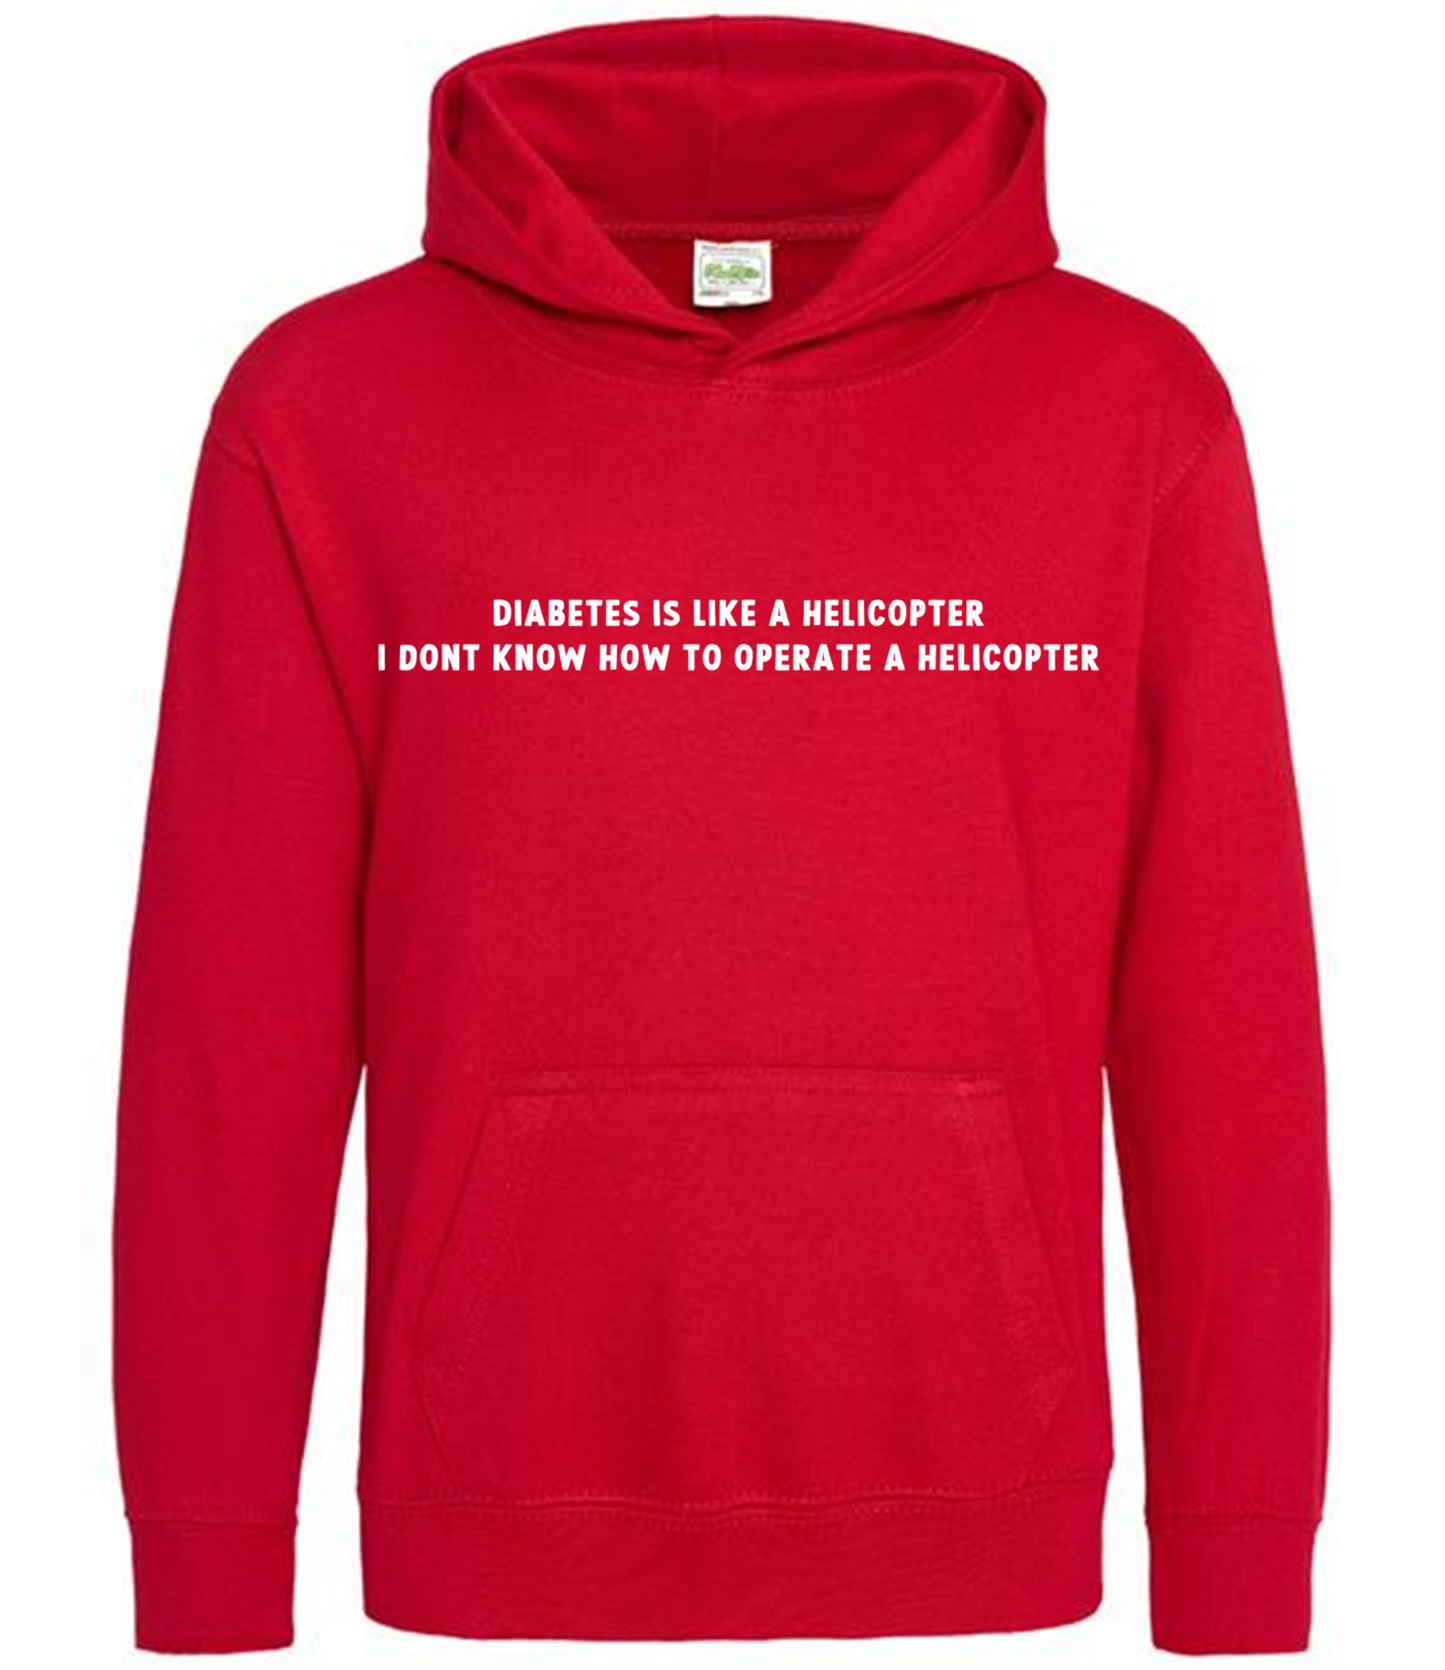 Diabetes Is Like A Helicopter, I Dont Know How To Operate A Helicopter Kids Hoodie